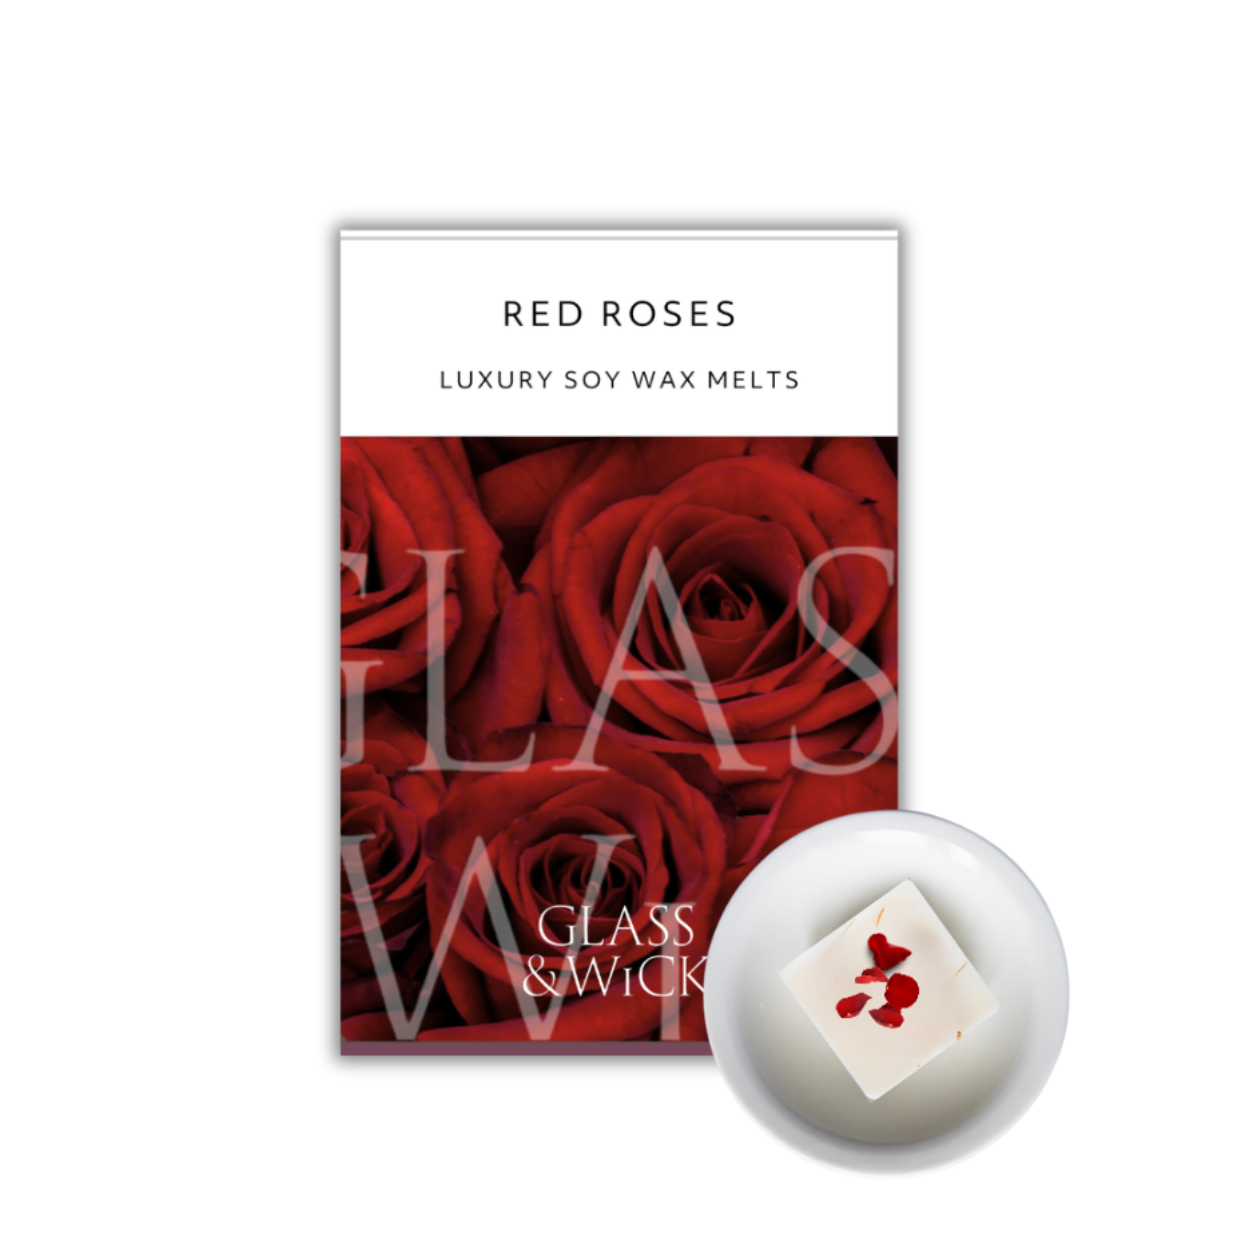 Red Roses Limited Edition Soy Wax Melts